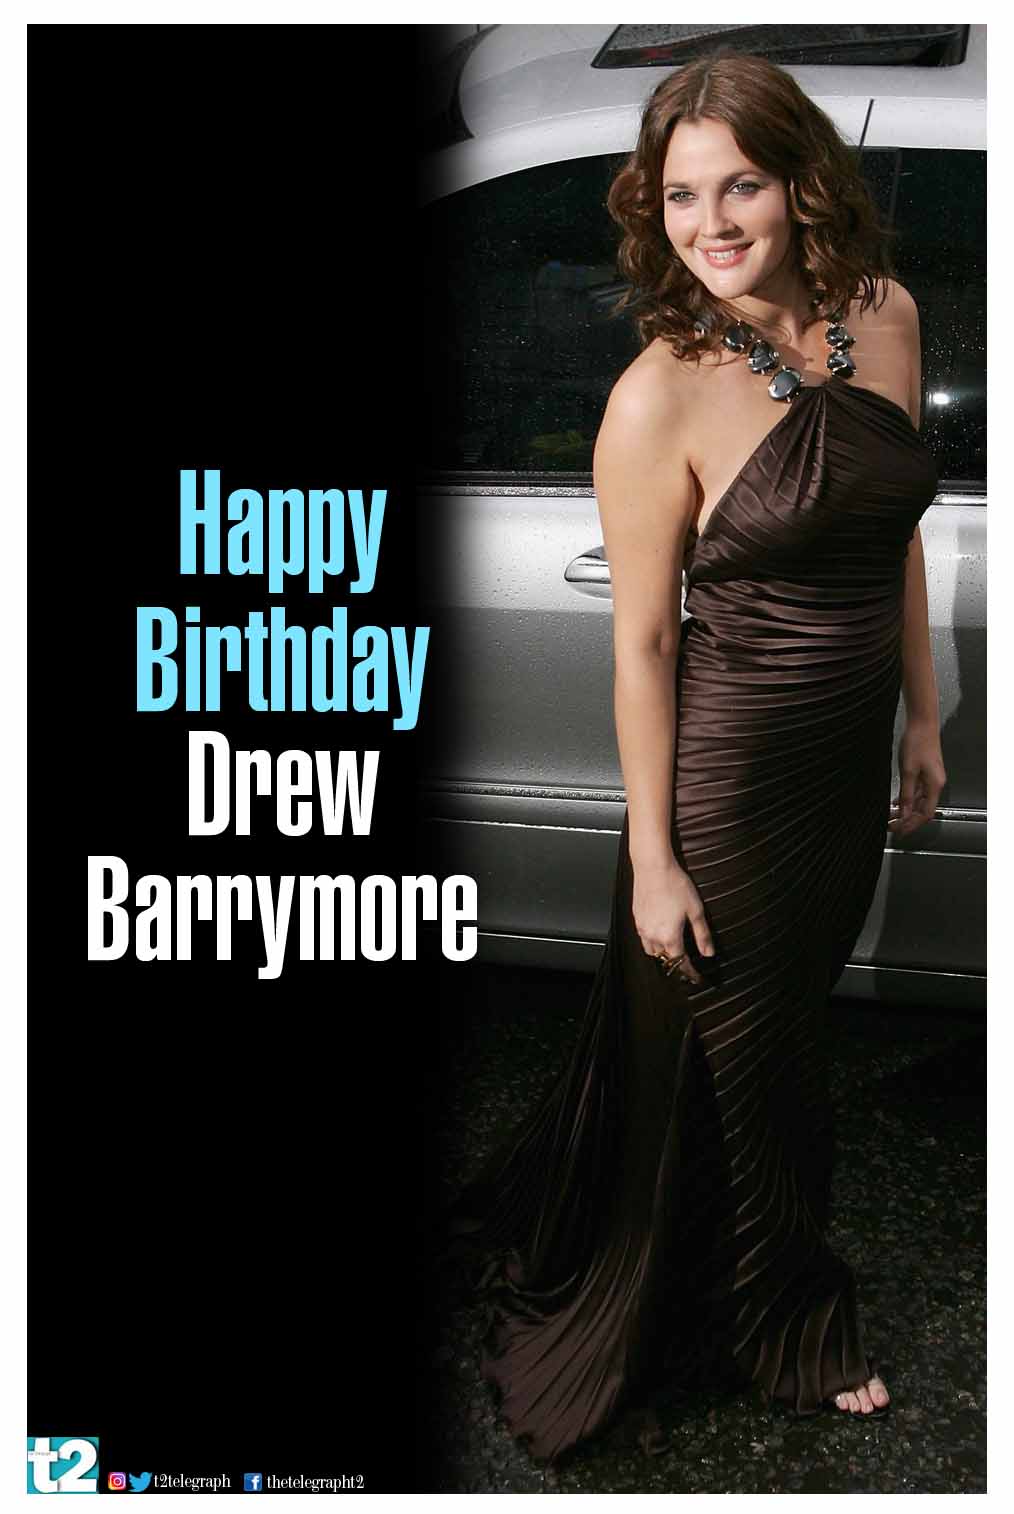 Cool, charming and chirpy. That\s Drew Barrymore for you. Happy birthday! 